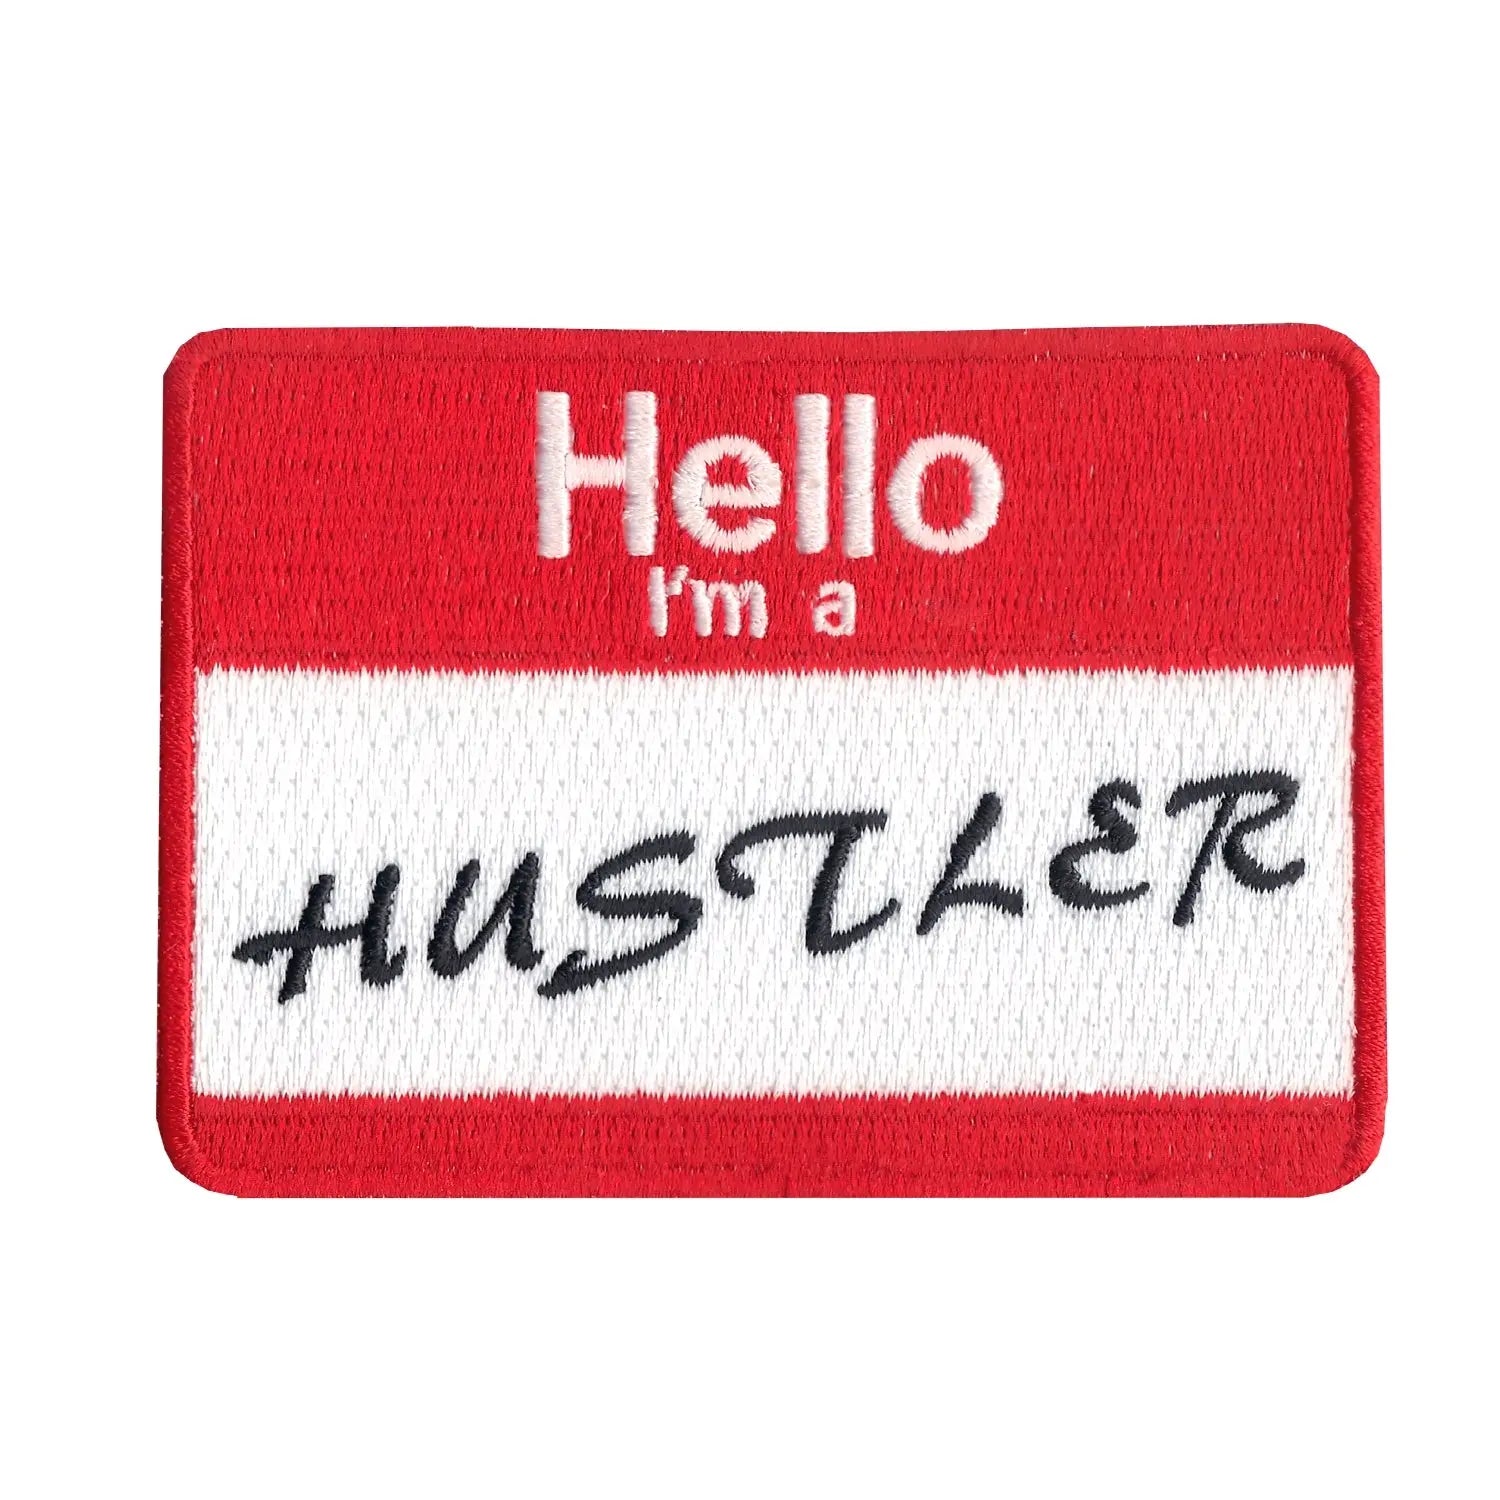 Hustler Name Tag Iron On Embroidered Patch 